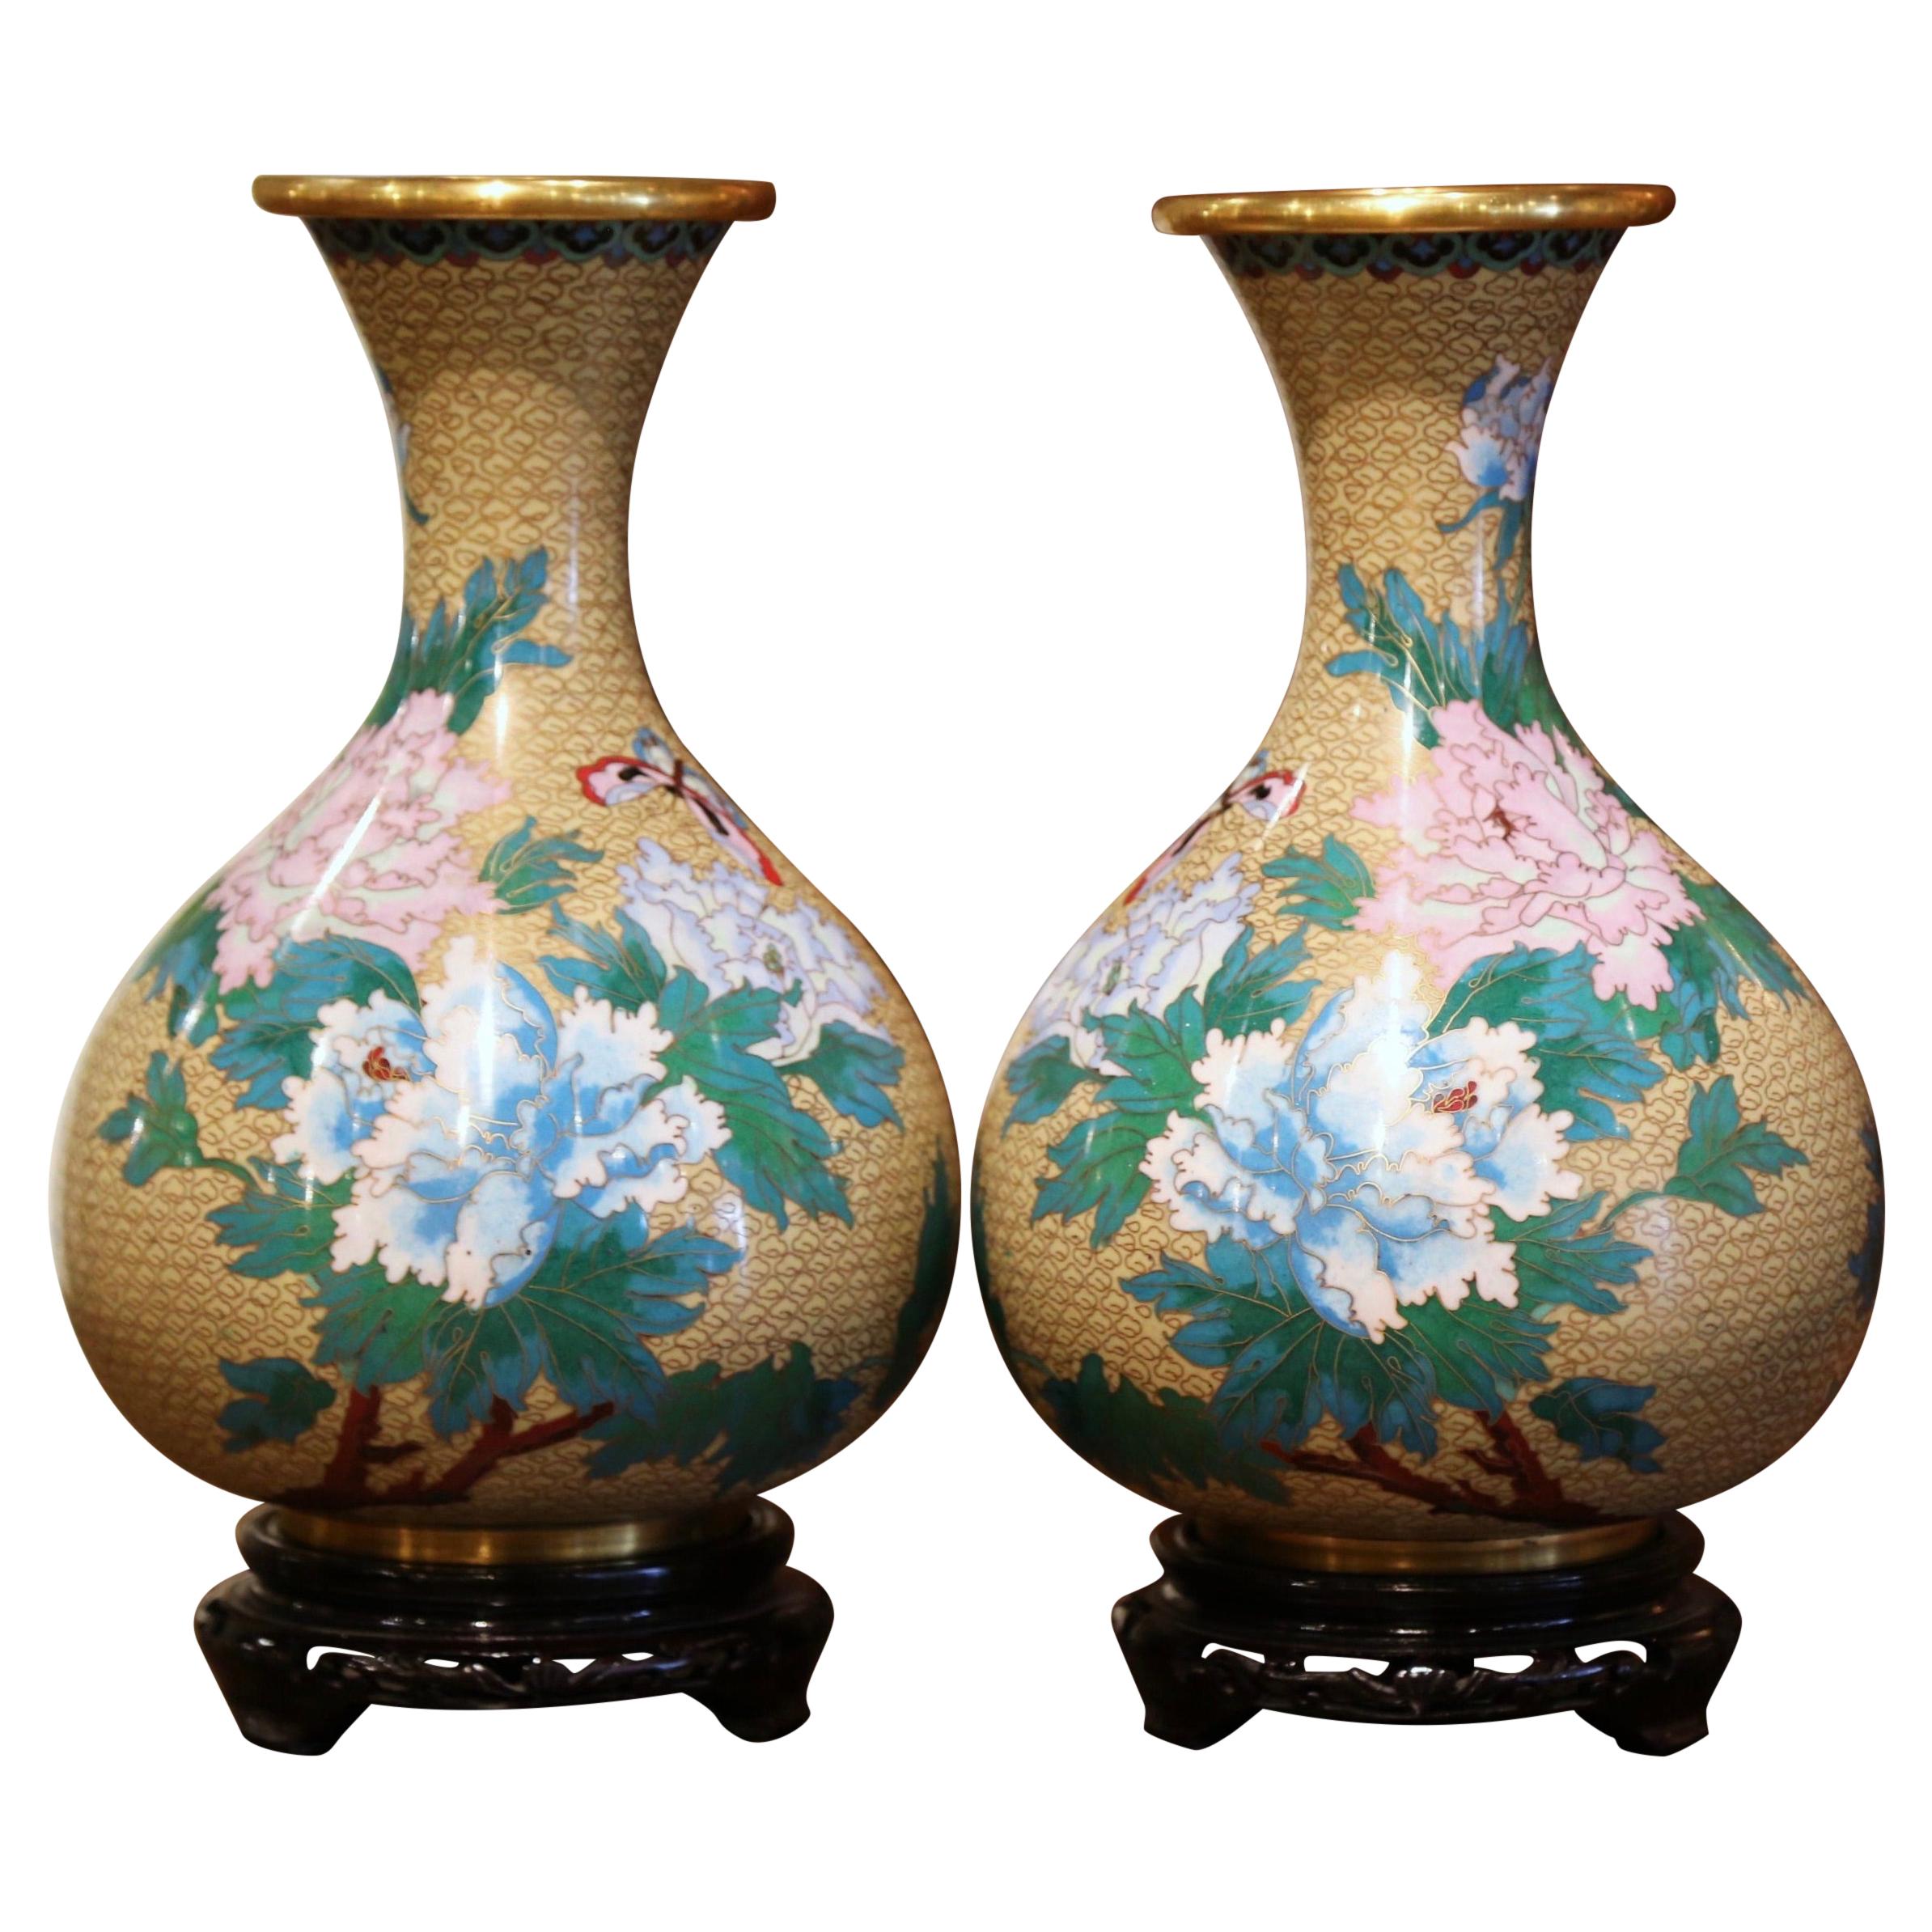 Pair of Vintage Chinese Champlevé Enamel Vases on Stand with Butterfly Motifs